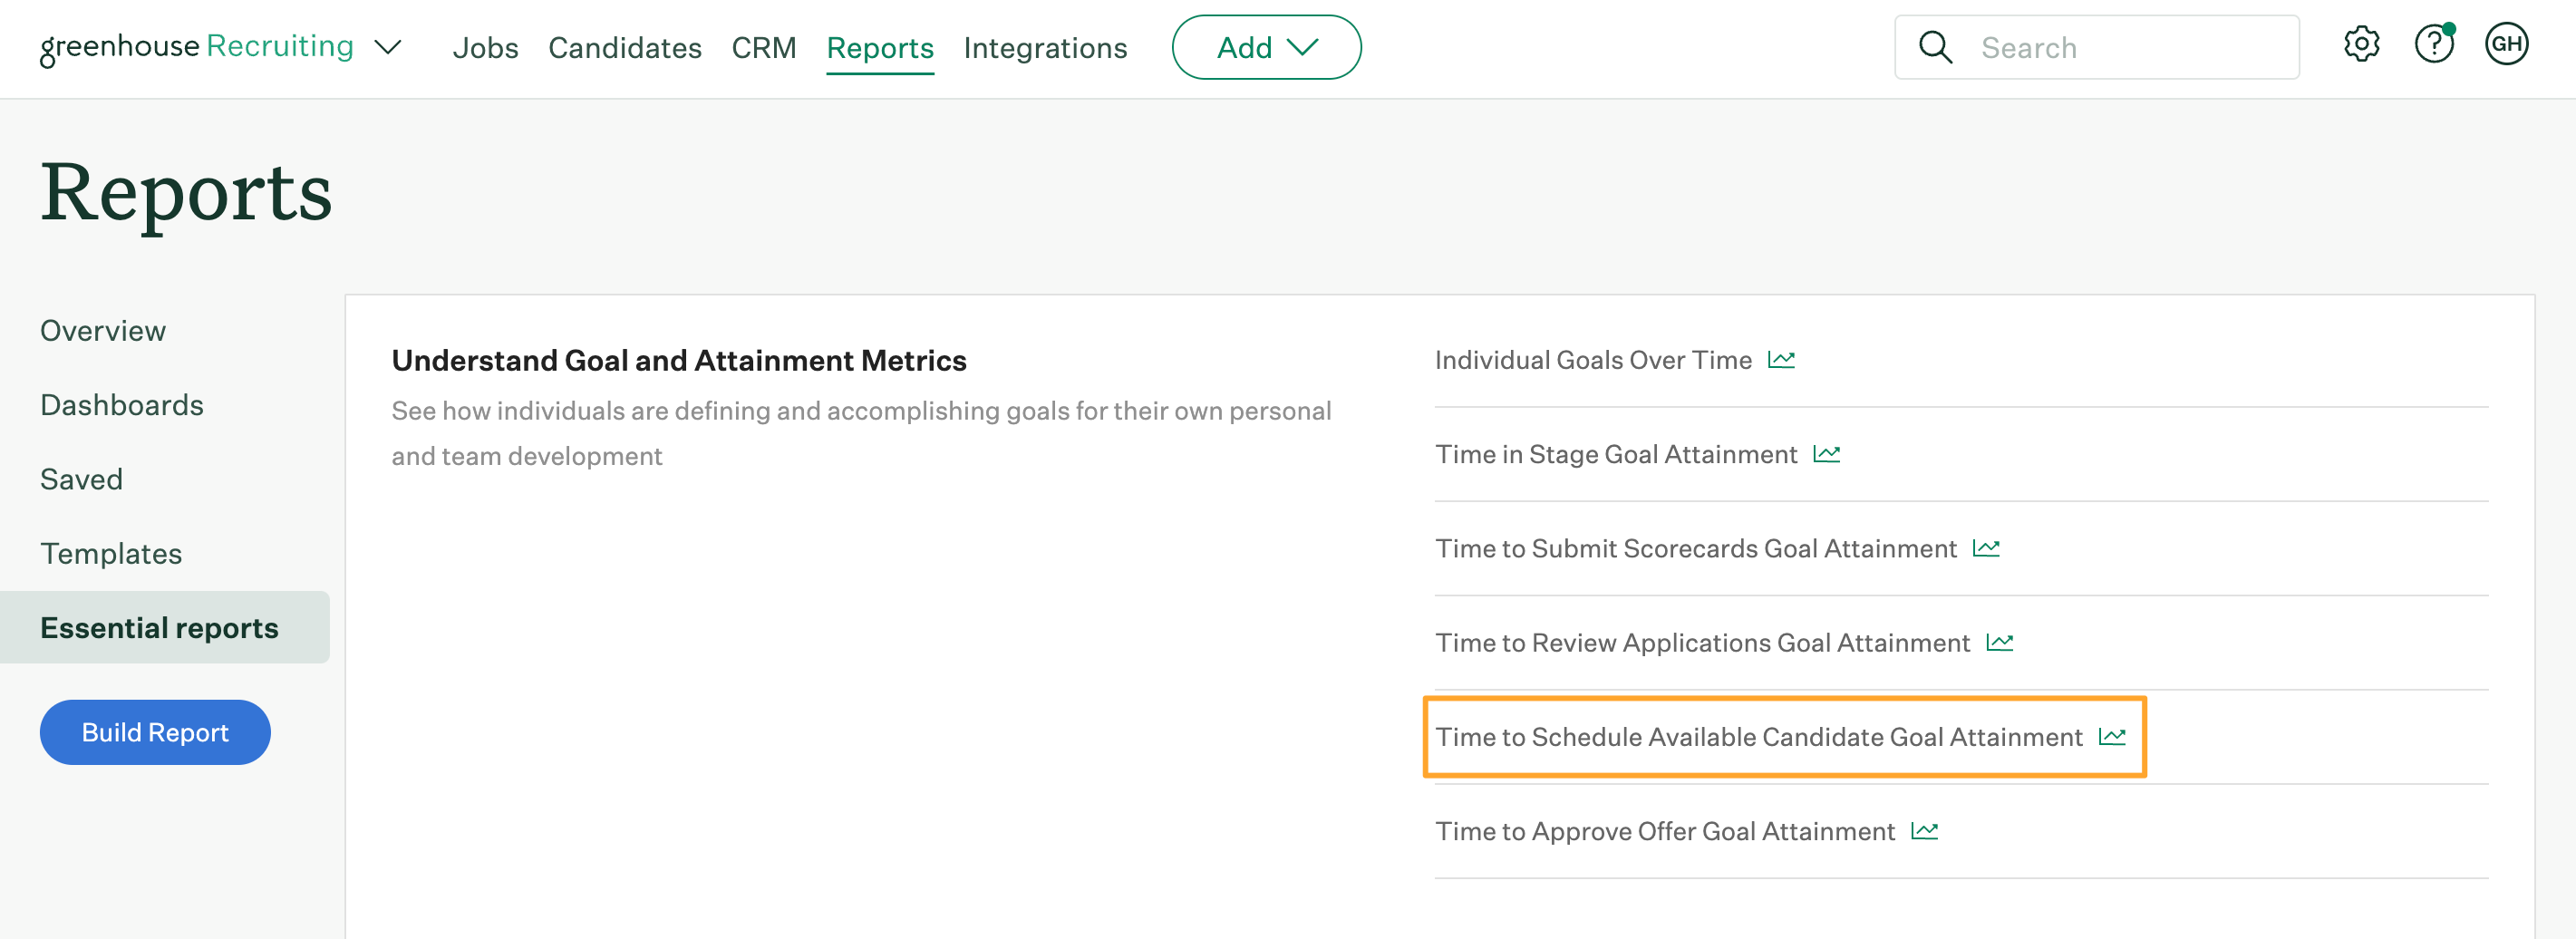 Time-to-schedule-available-candidate-goal-attainment-report-highlighted-on-essential-reports-page.png